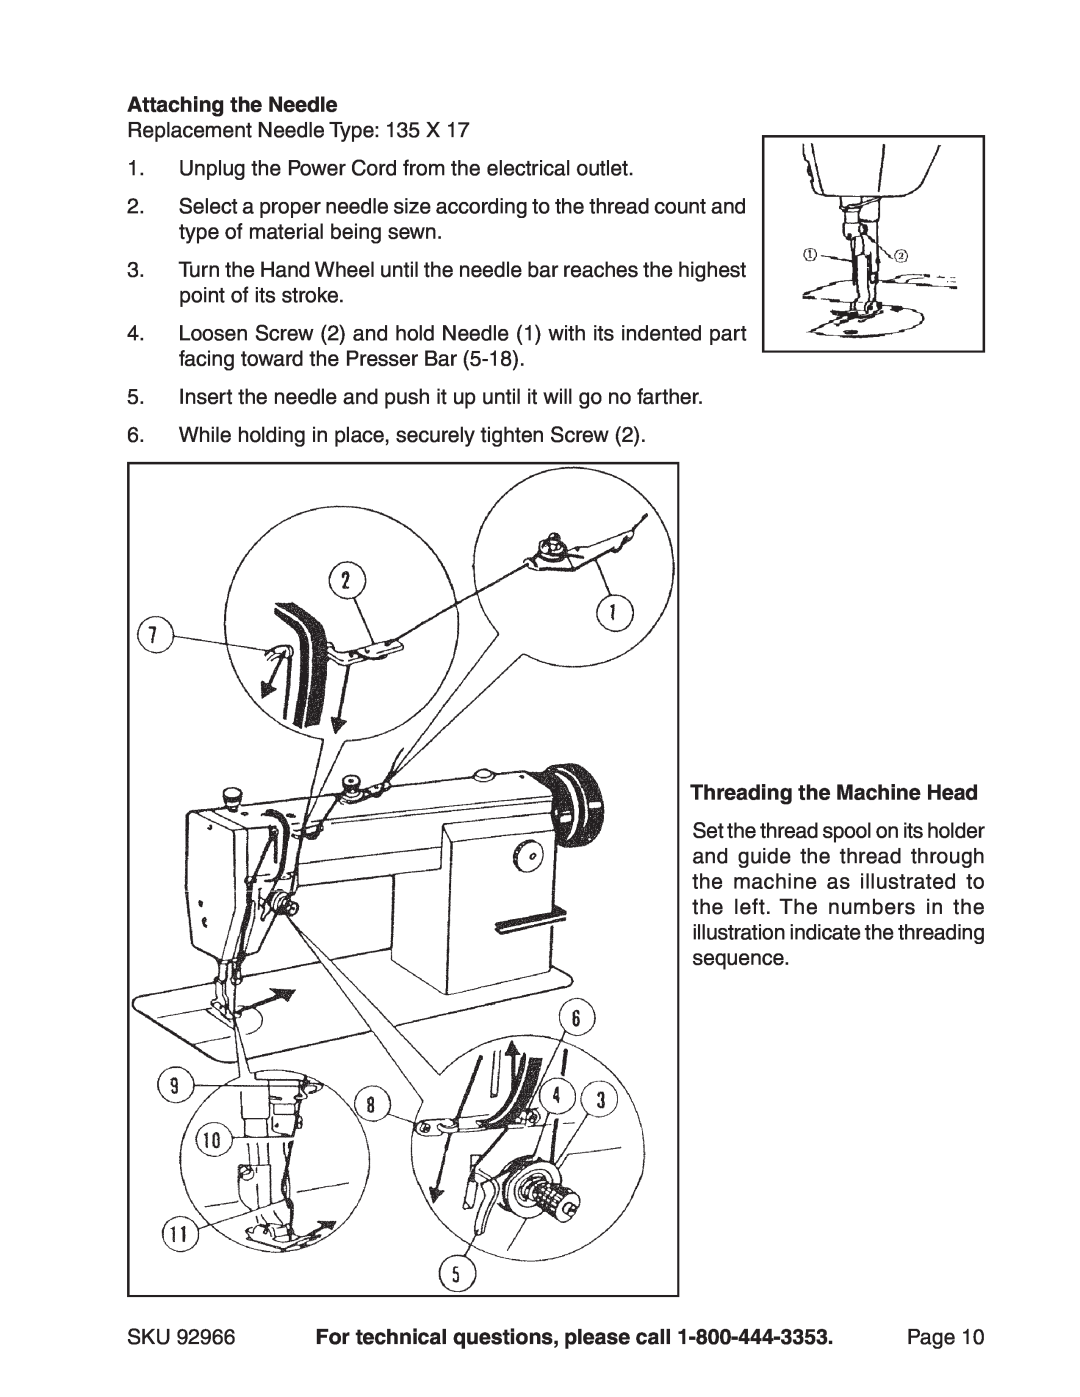 Harbor Freight Tools 92966 manual Attaching the Needle, Threading the Machine Head, Replacement Needle Type 135 X 